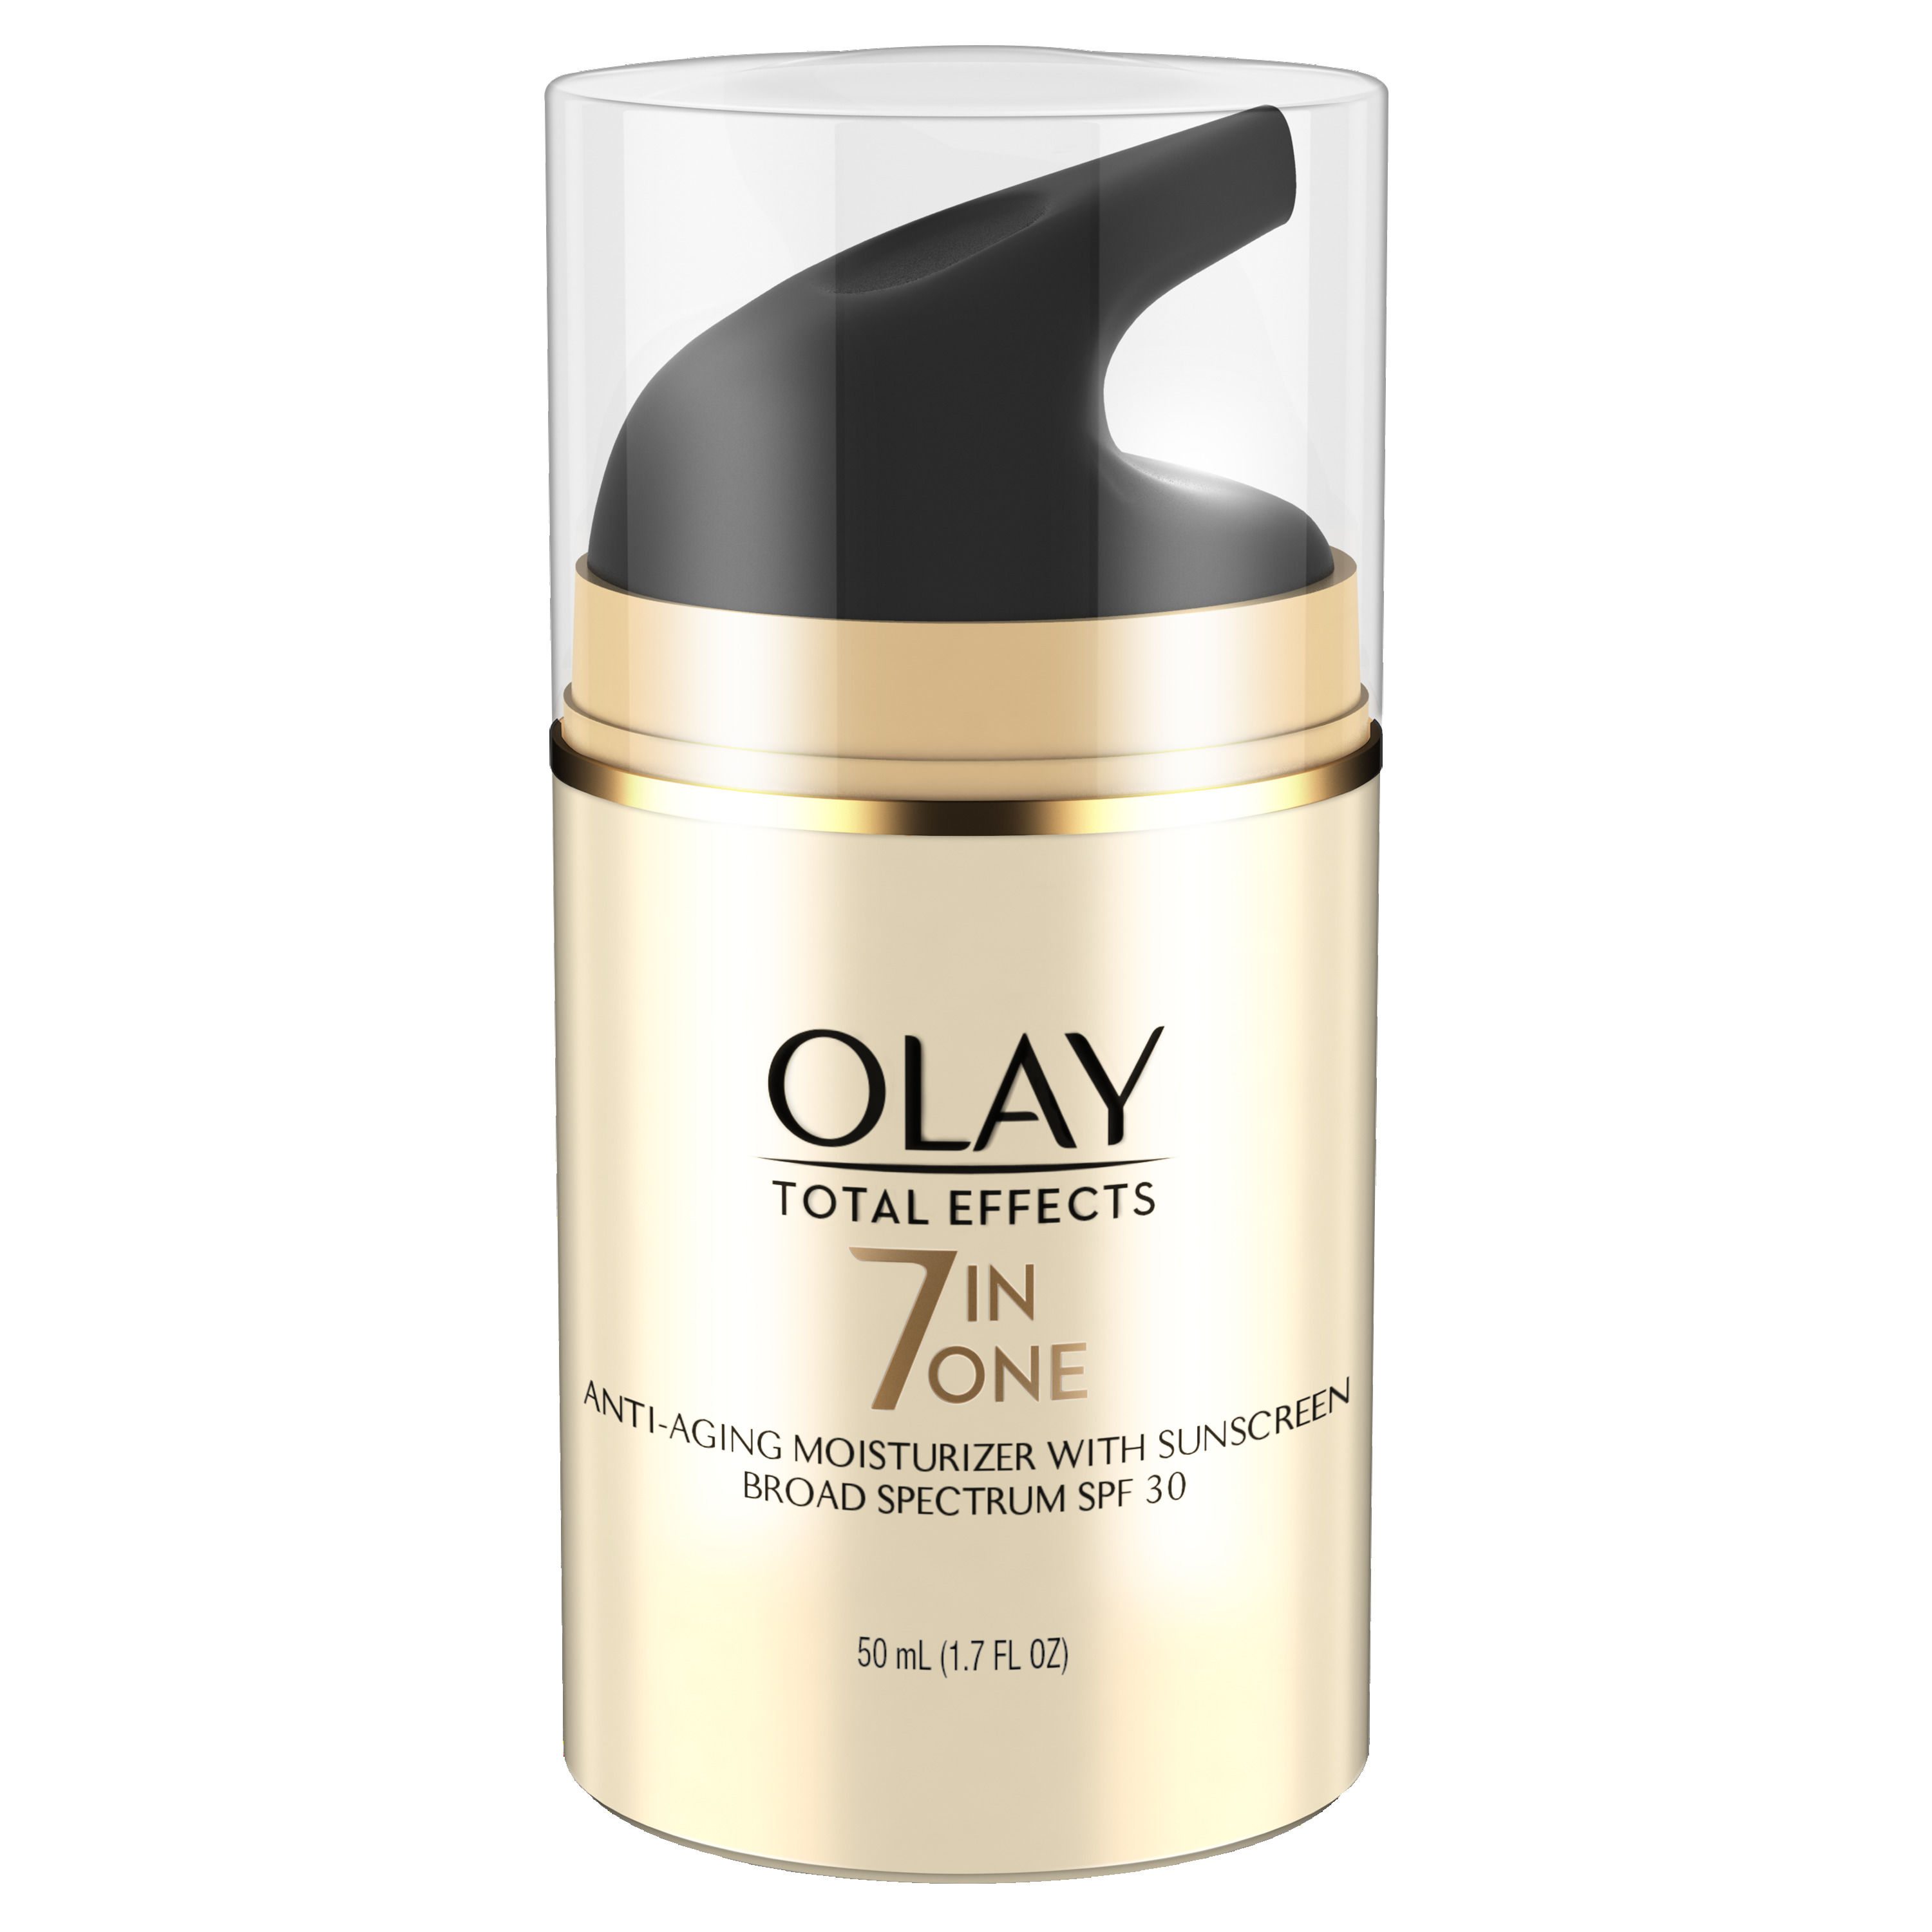 Olay Total Effects 7-in-1 Anti-Aging Daily Face Moisturizer With SPF 30, 1.7 fl oz